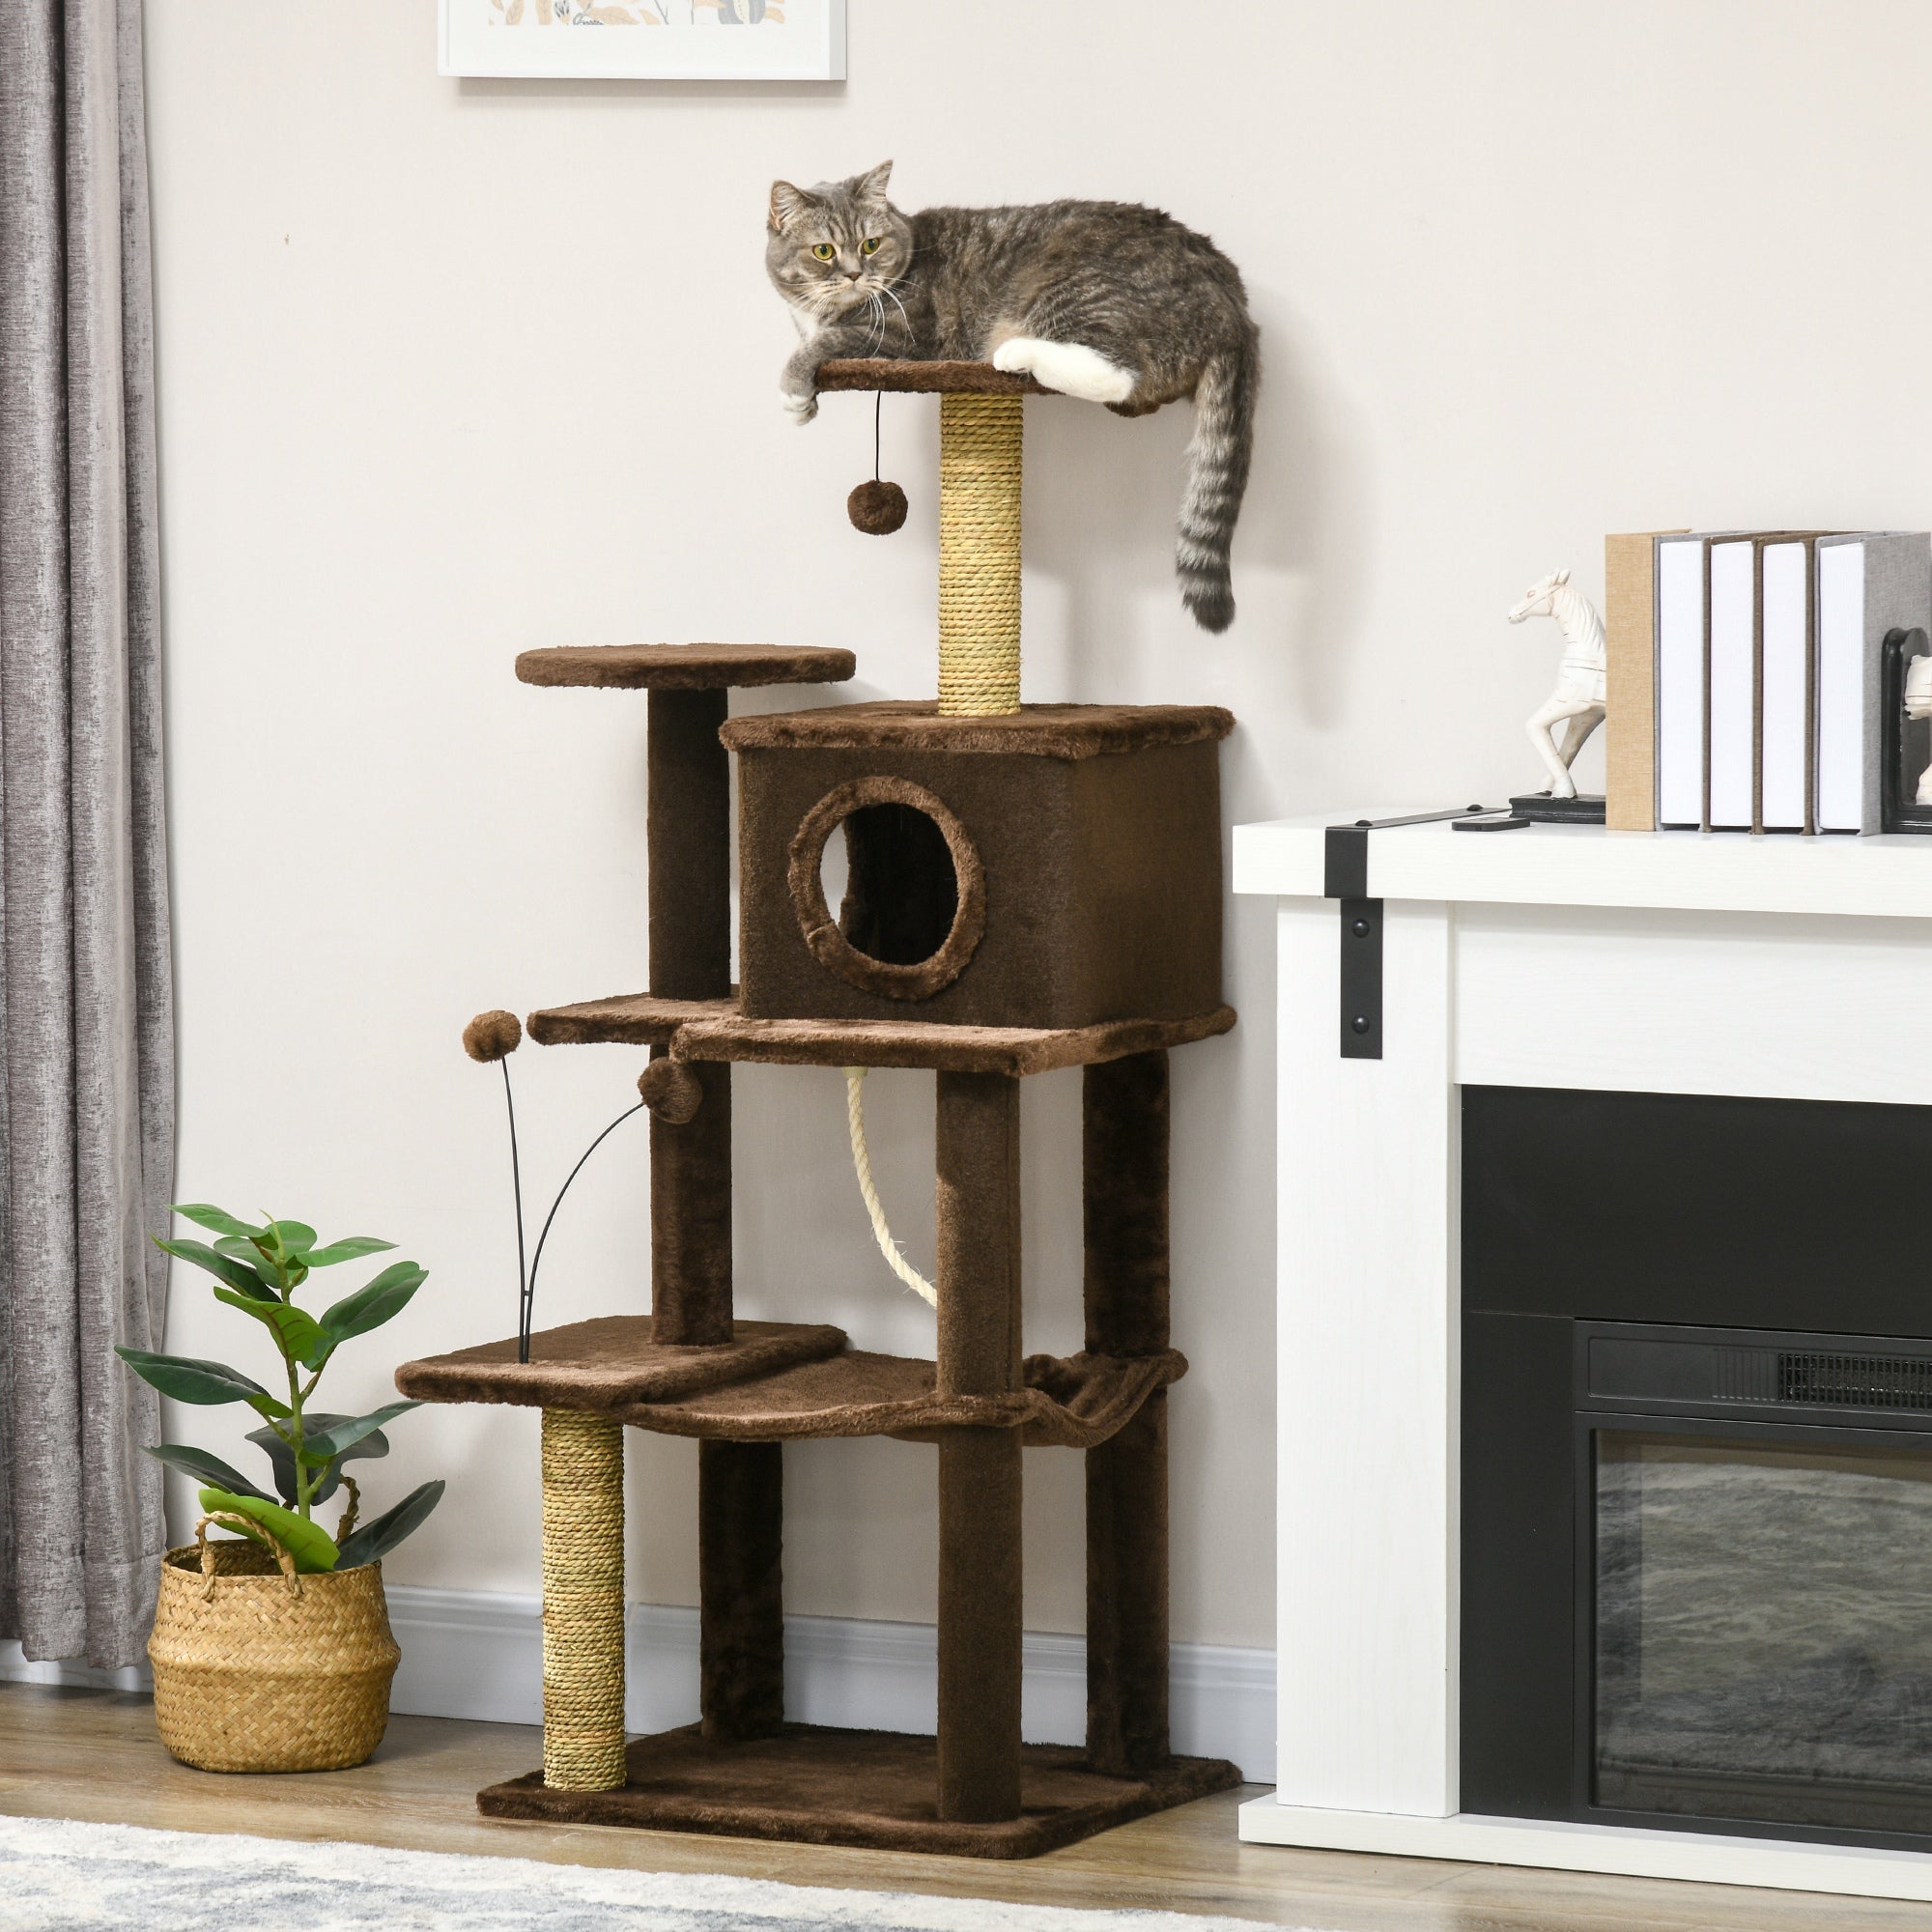 136cm Cat Tree for Indoor Cats, Modern Cat Tower with Scratching Posts, house, Platforms, Toy Ball - Brown, PawHut,